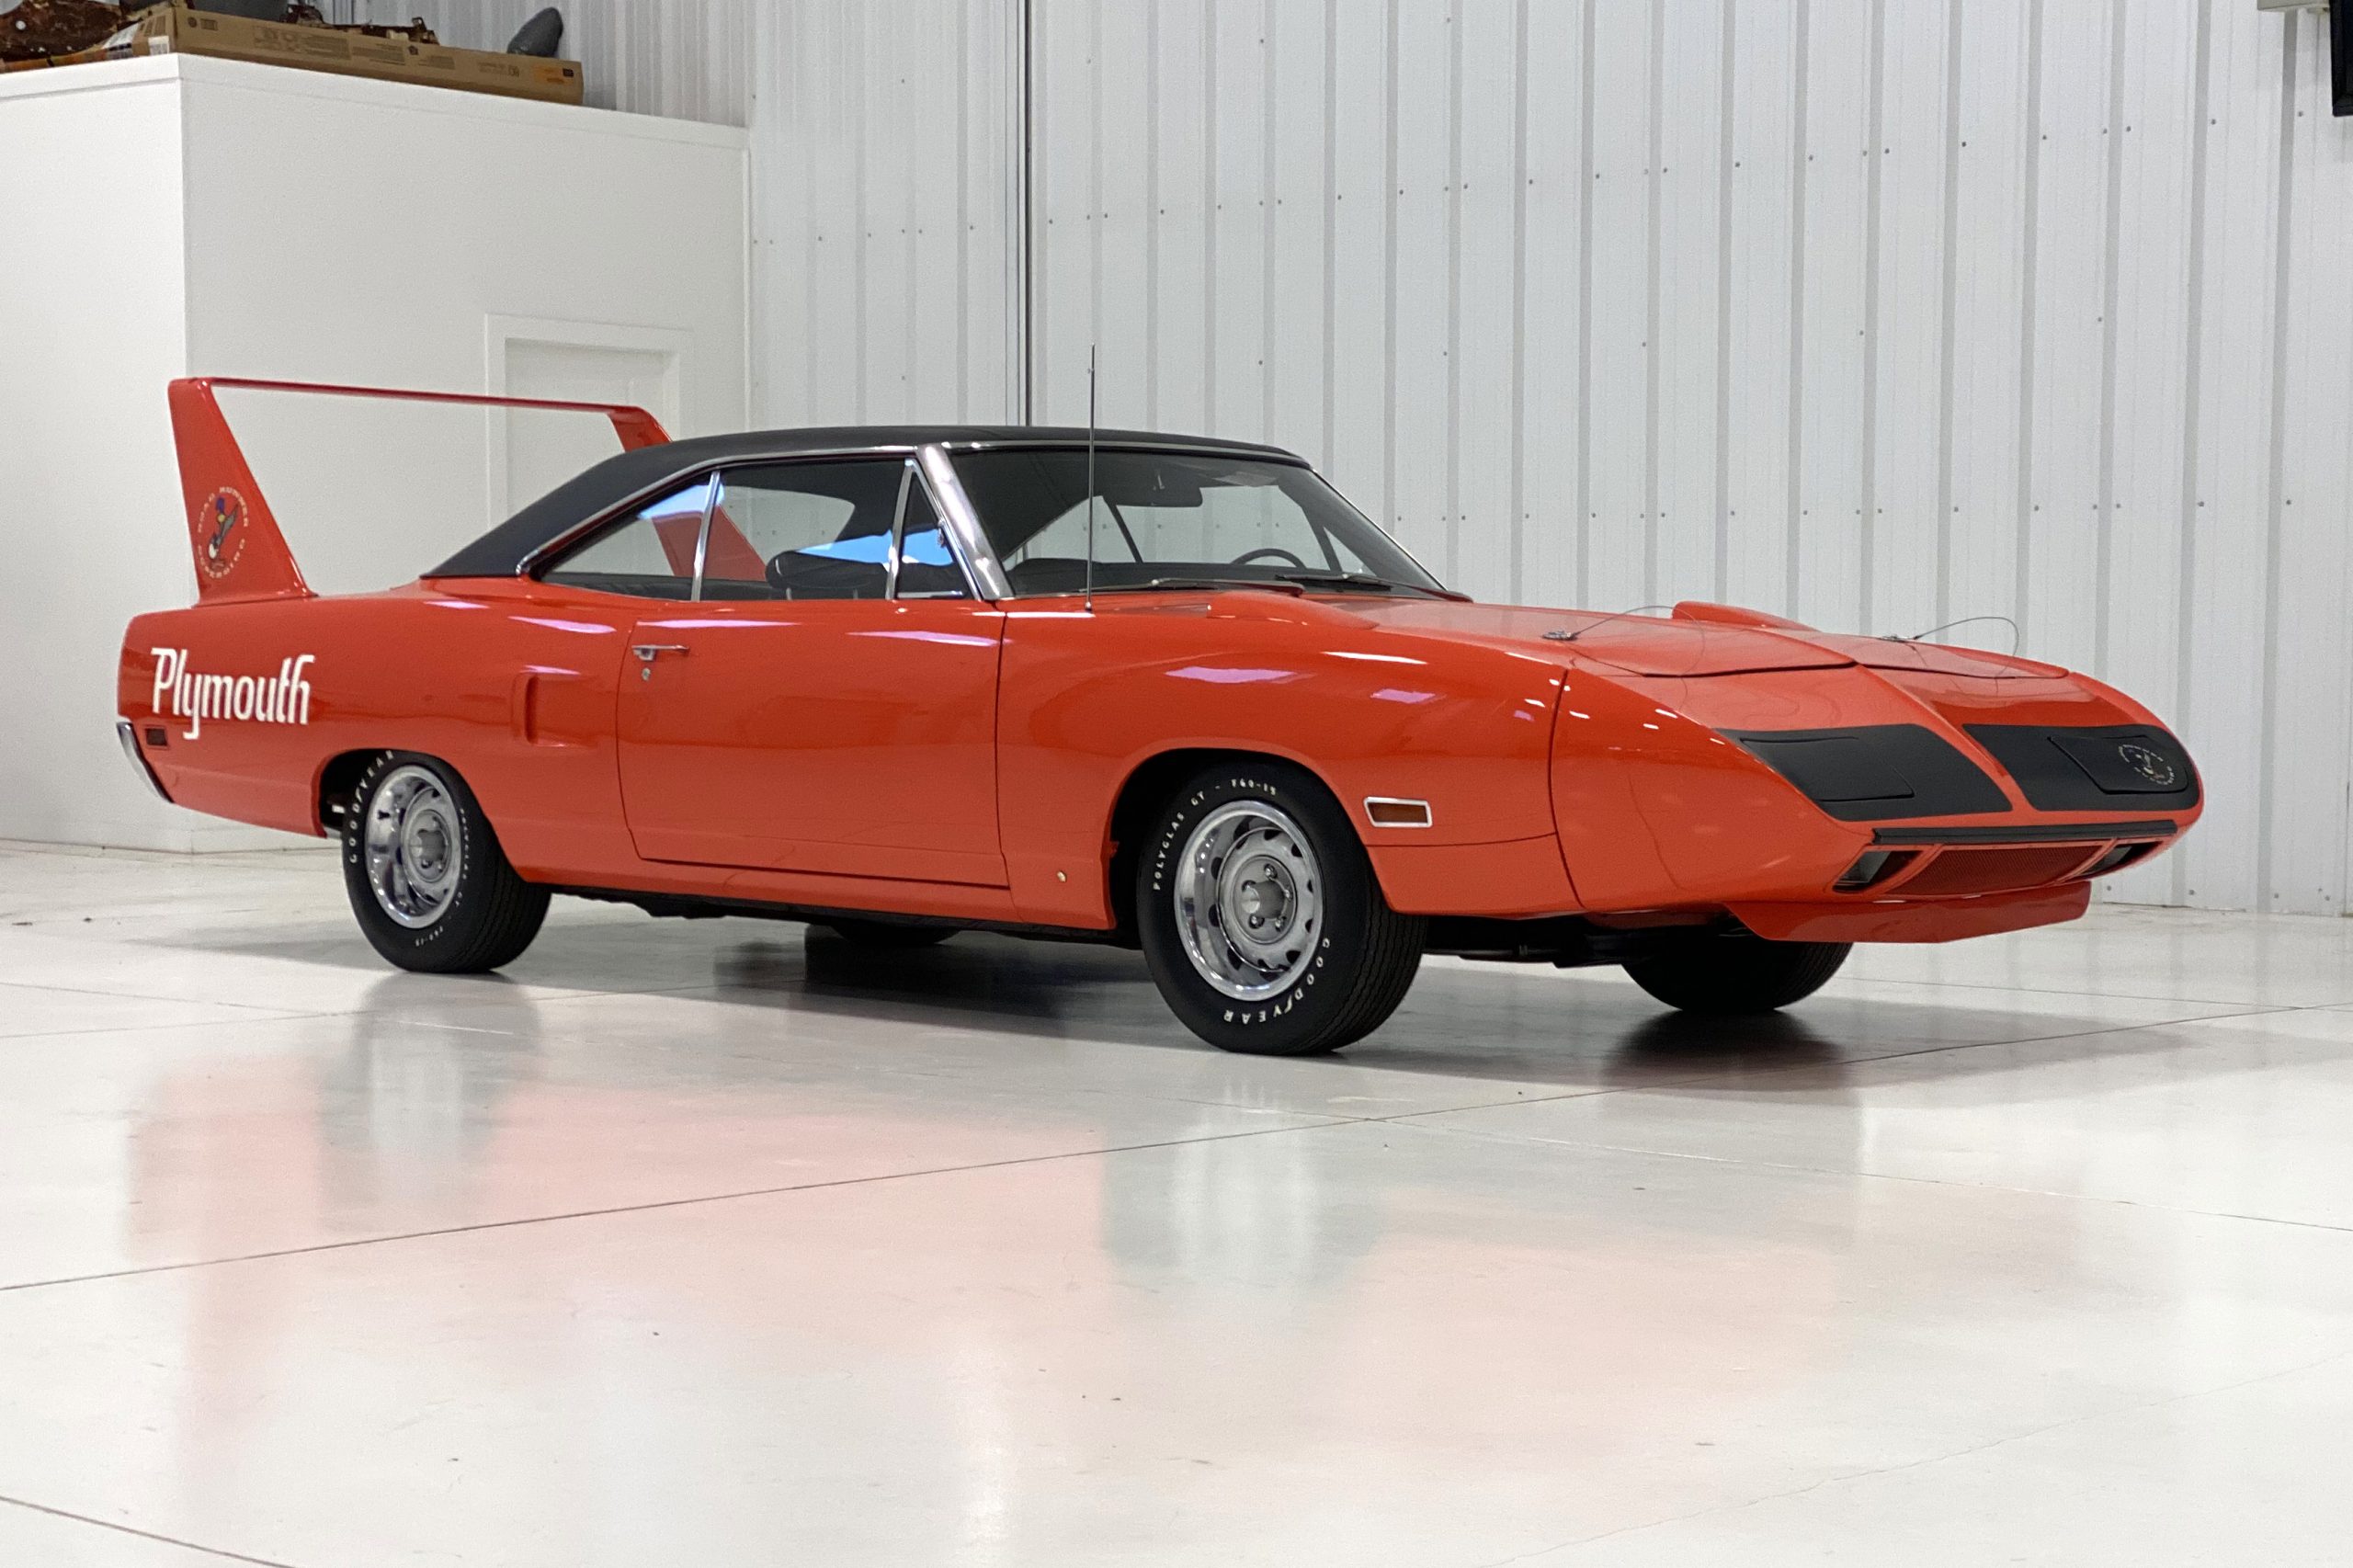 1970 Plymouth Superbird | Hagerty Insider